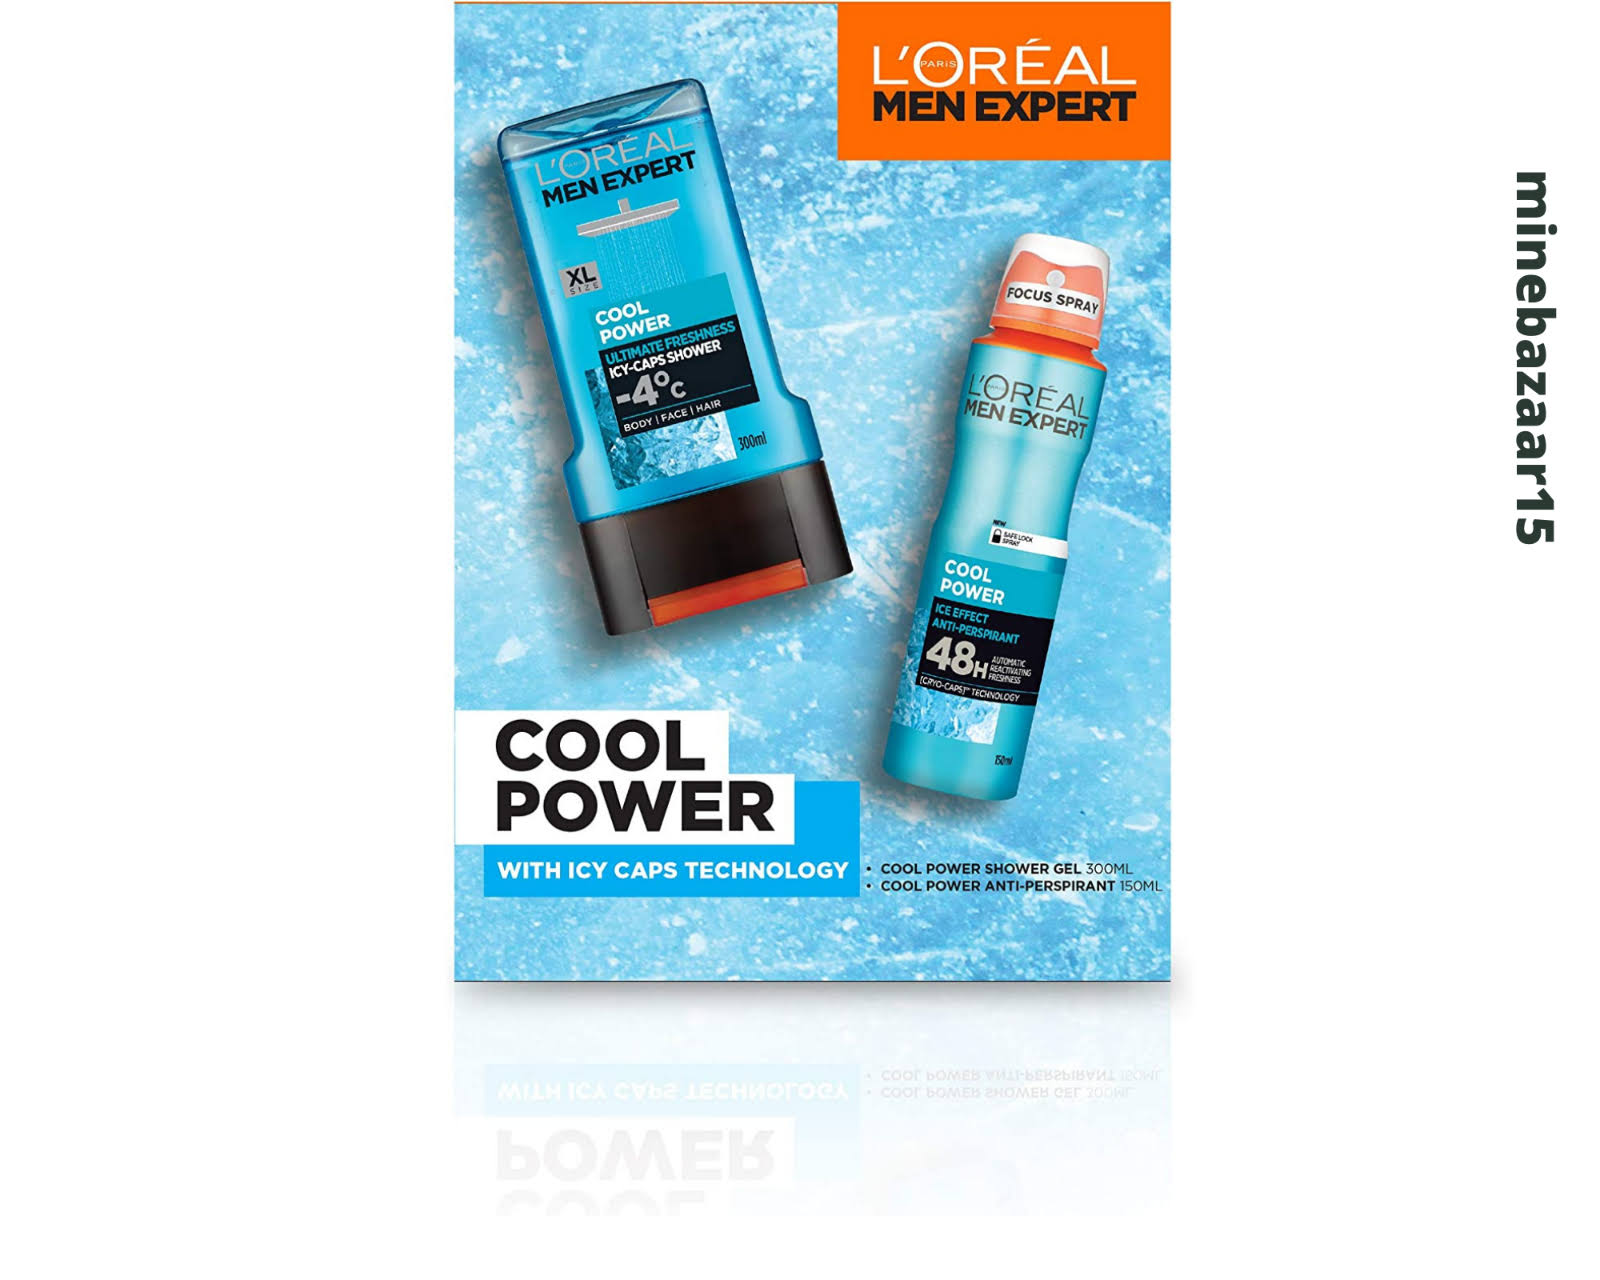 L'Oreal Men Expert Cool Power 2 Piece Gift Set For Him (Worth £10.00)